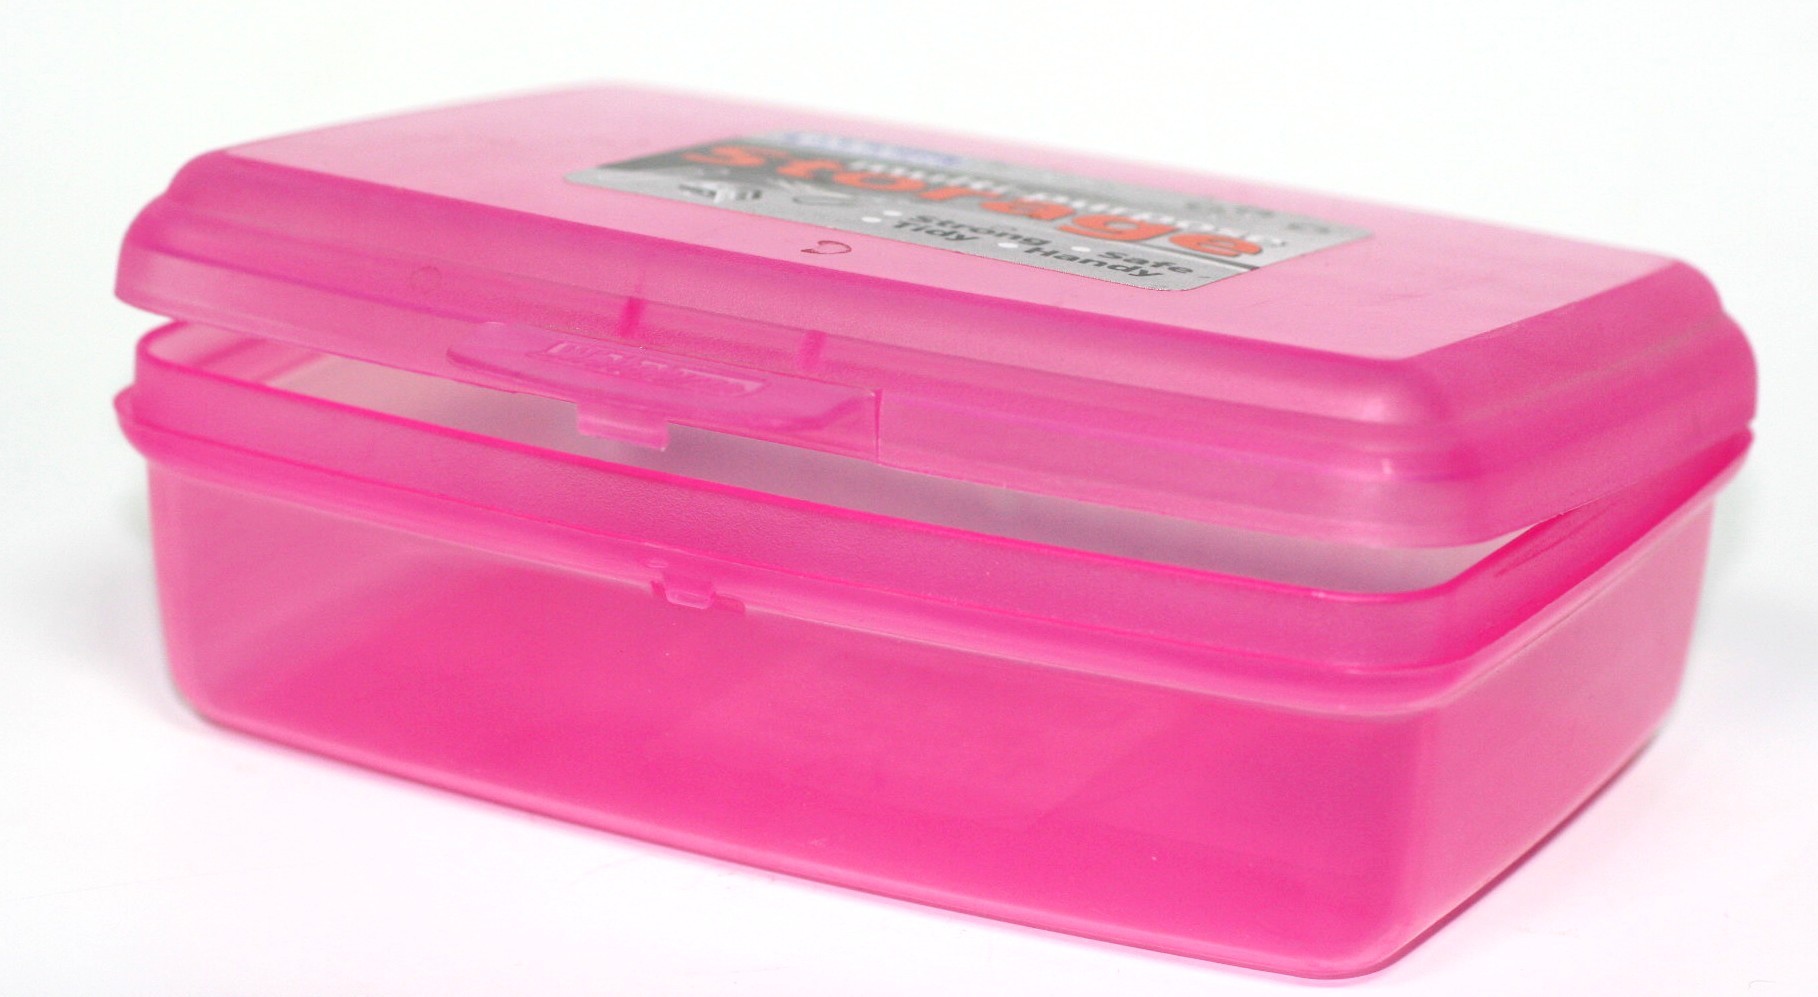 500ml STORAGE BOX & HINGED LID WITH CLIP